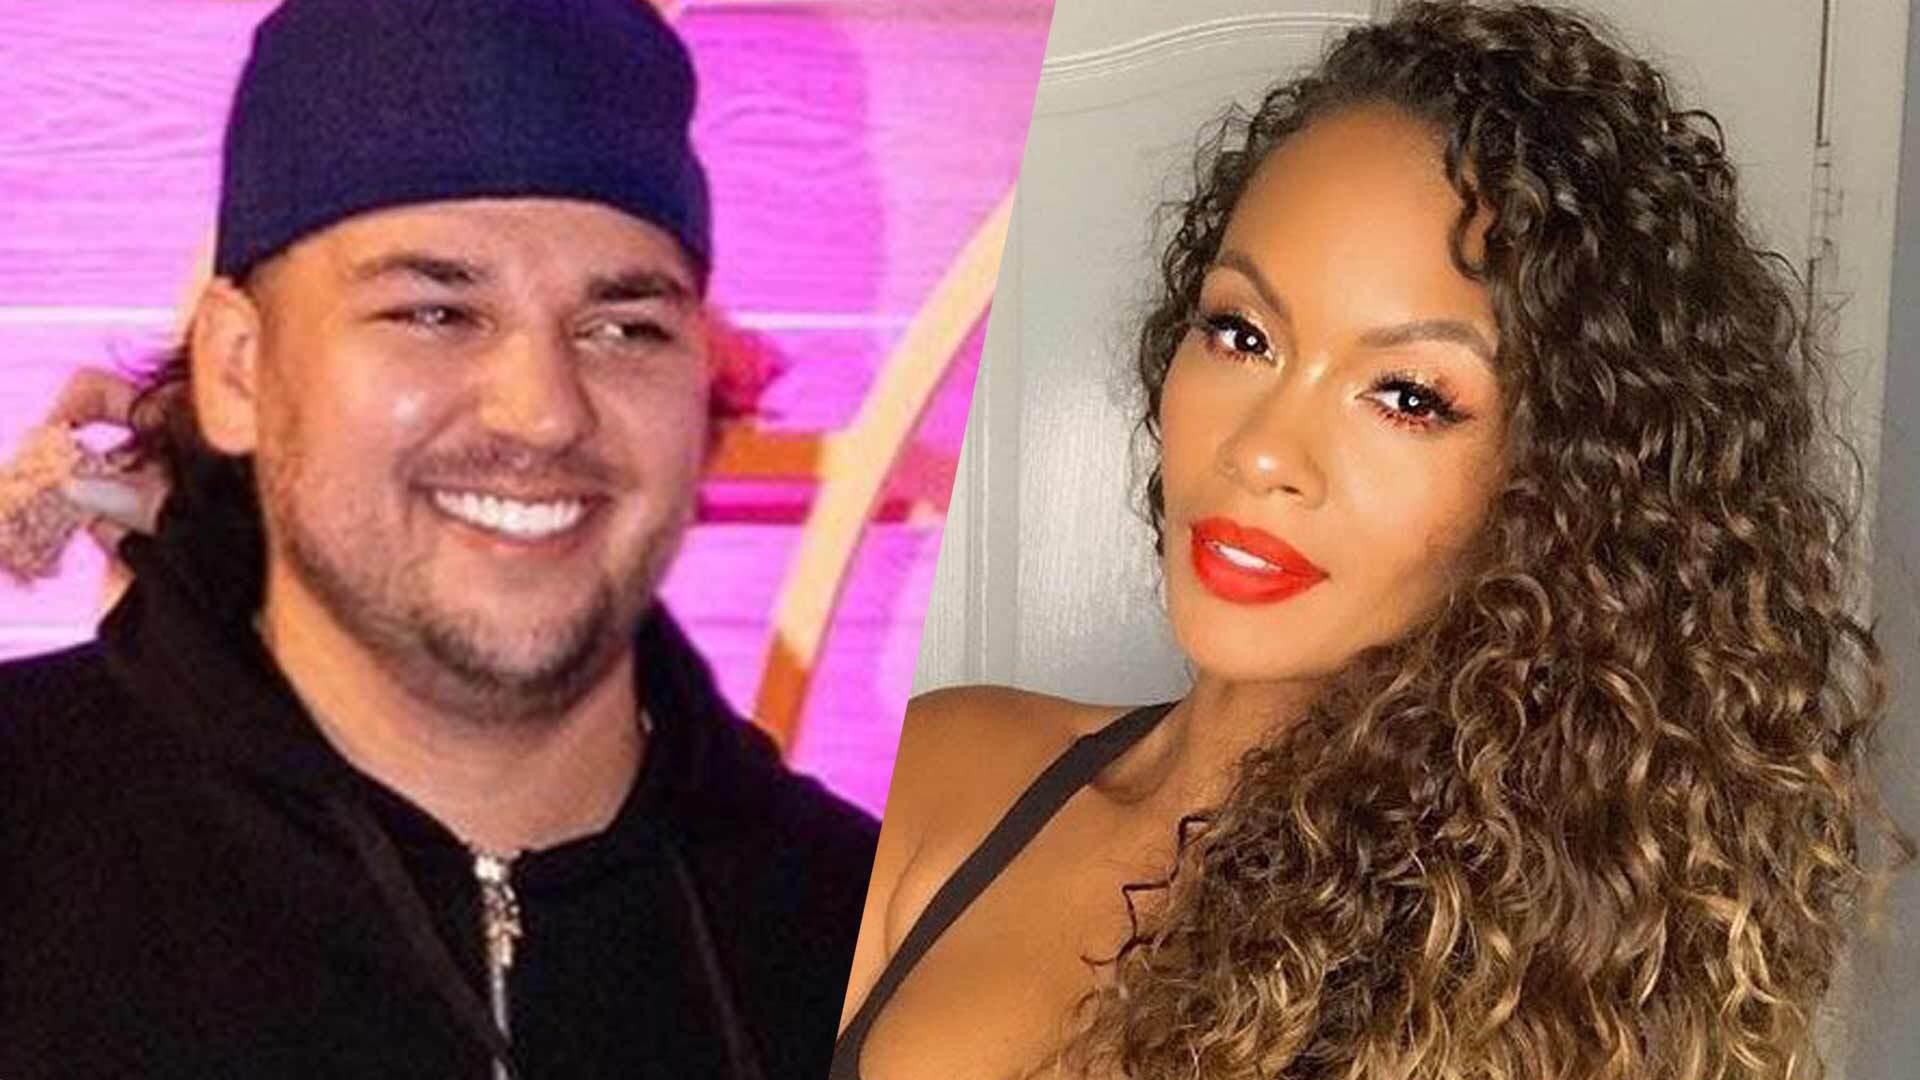 ‘Basketball Wives’ Star Evelyn Lozada Gets Flirty With Rob Kardashian On IG After His Weight Loss